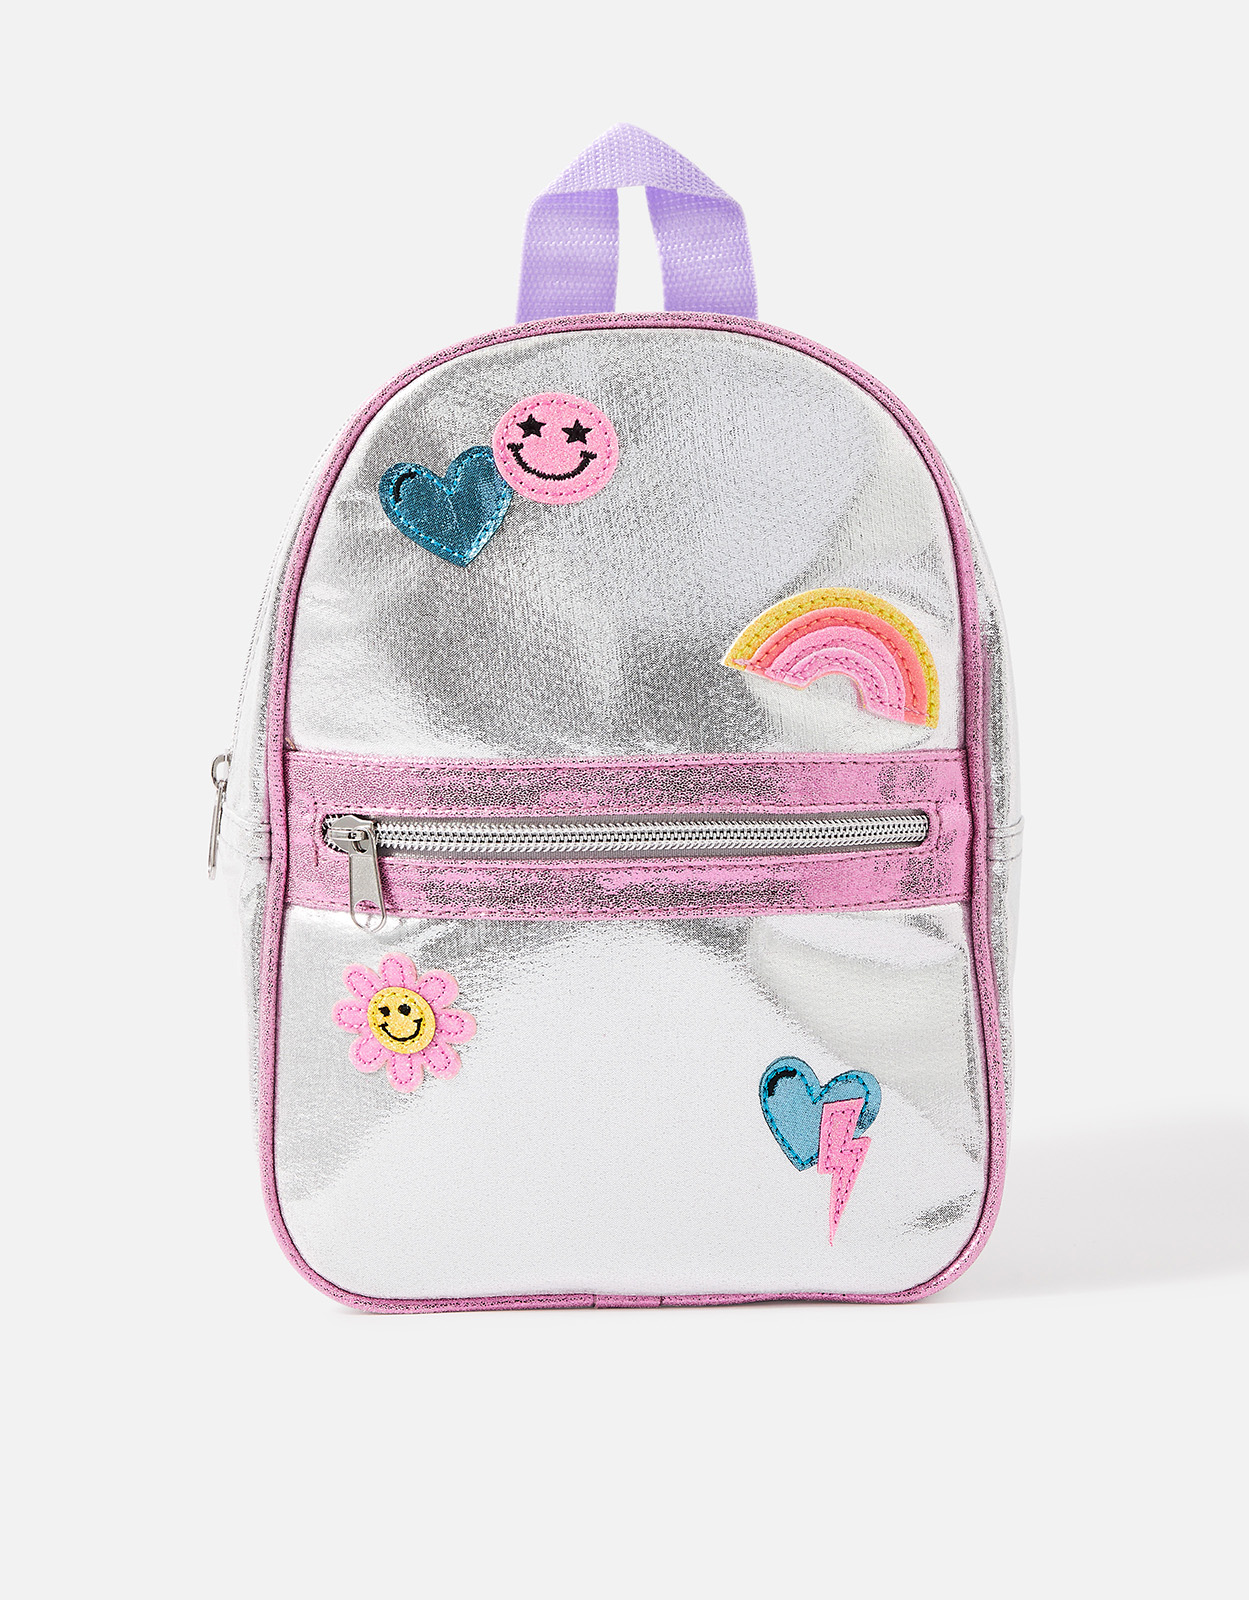 Accessorize Girl's Girls Silver and Pink Rainbow Emoji Badge Backpack, Size: 26x19cm